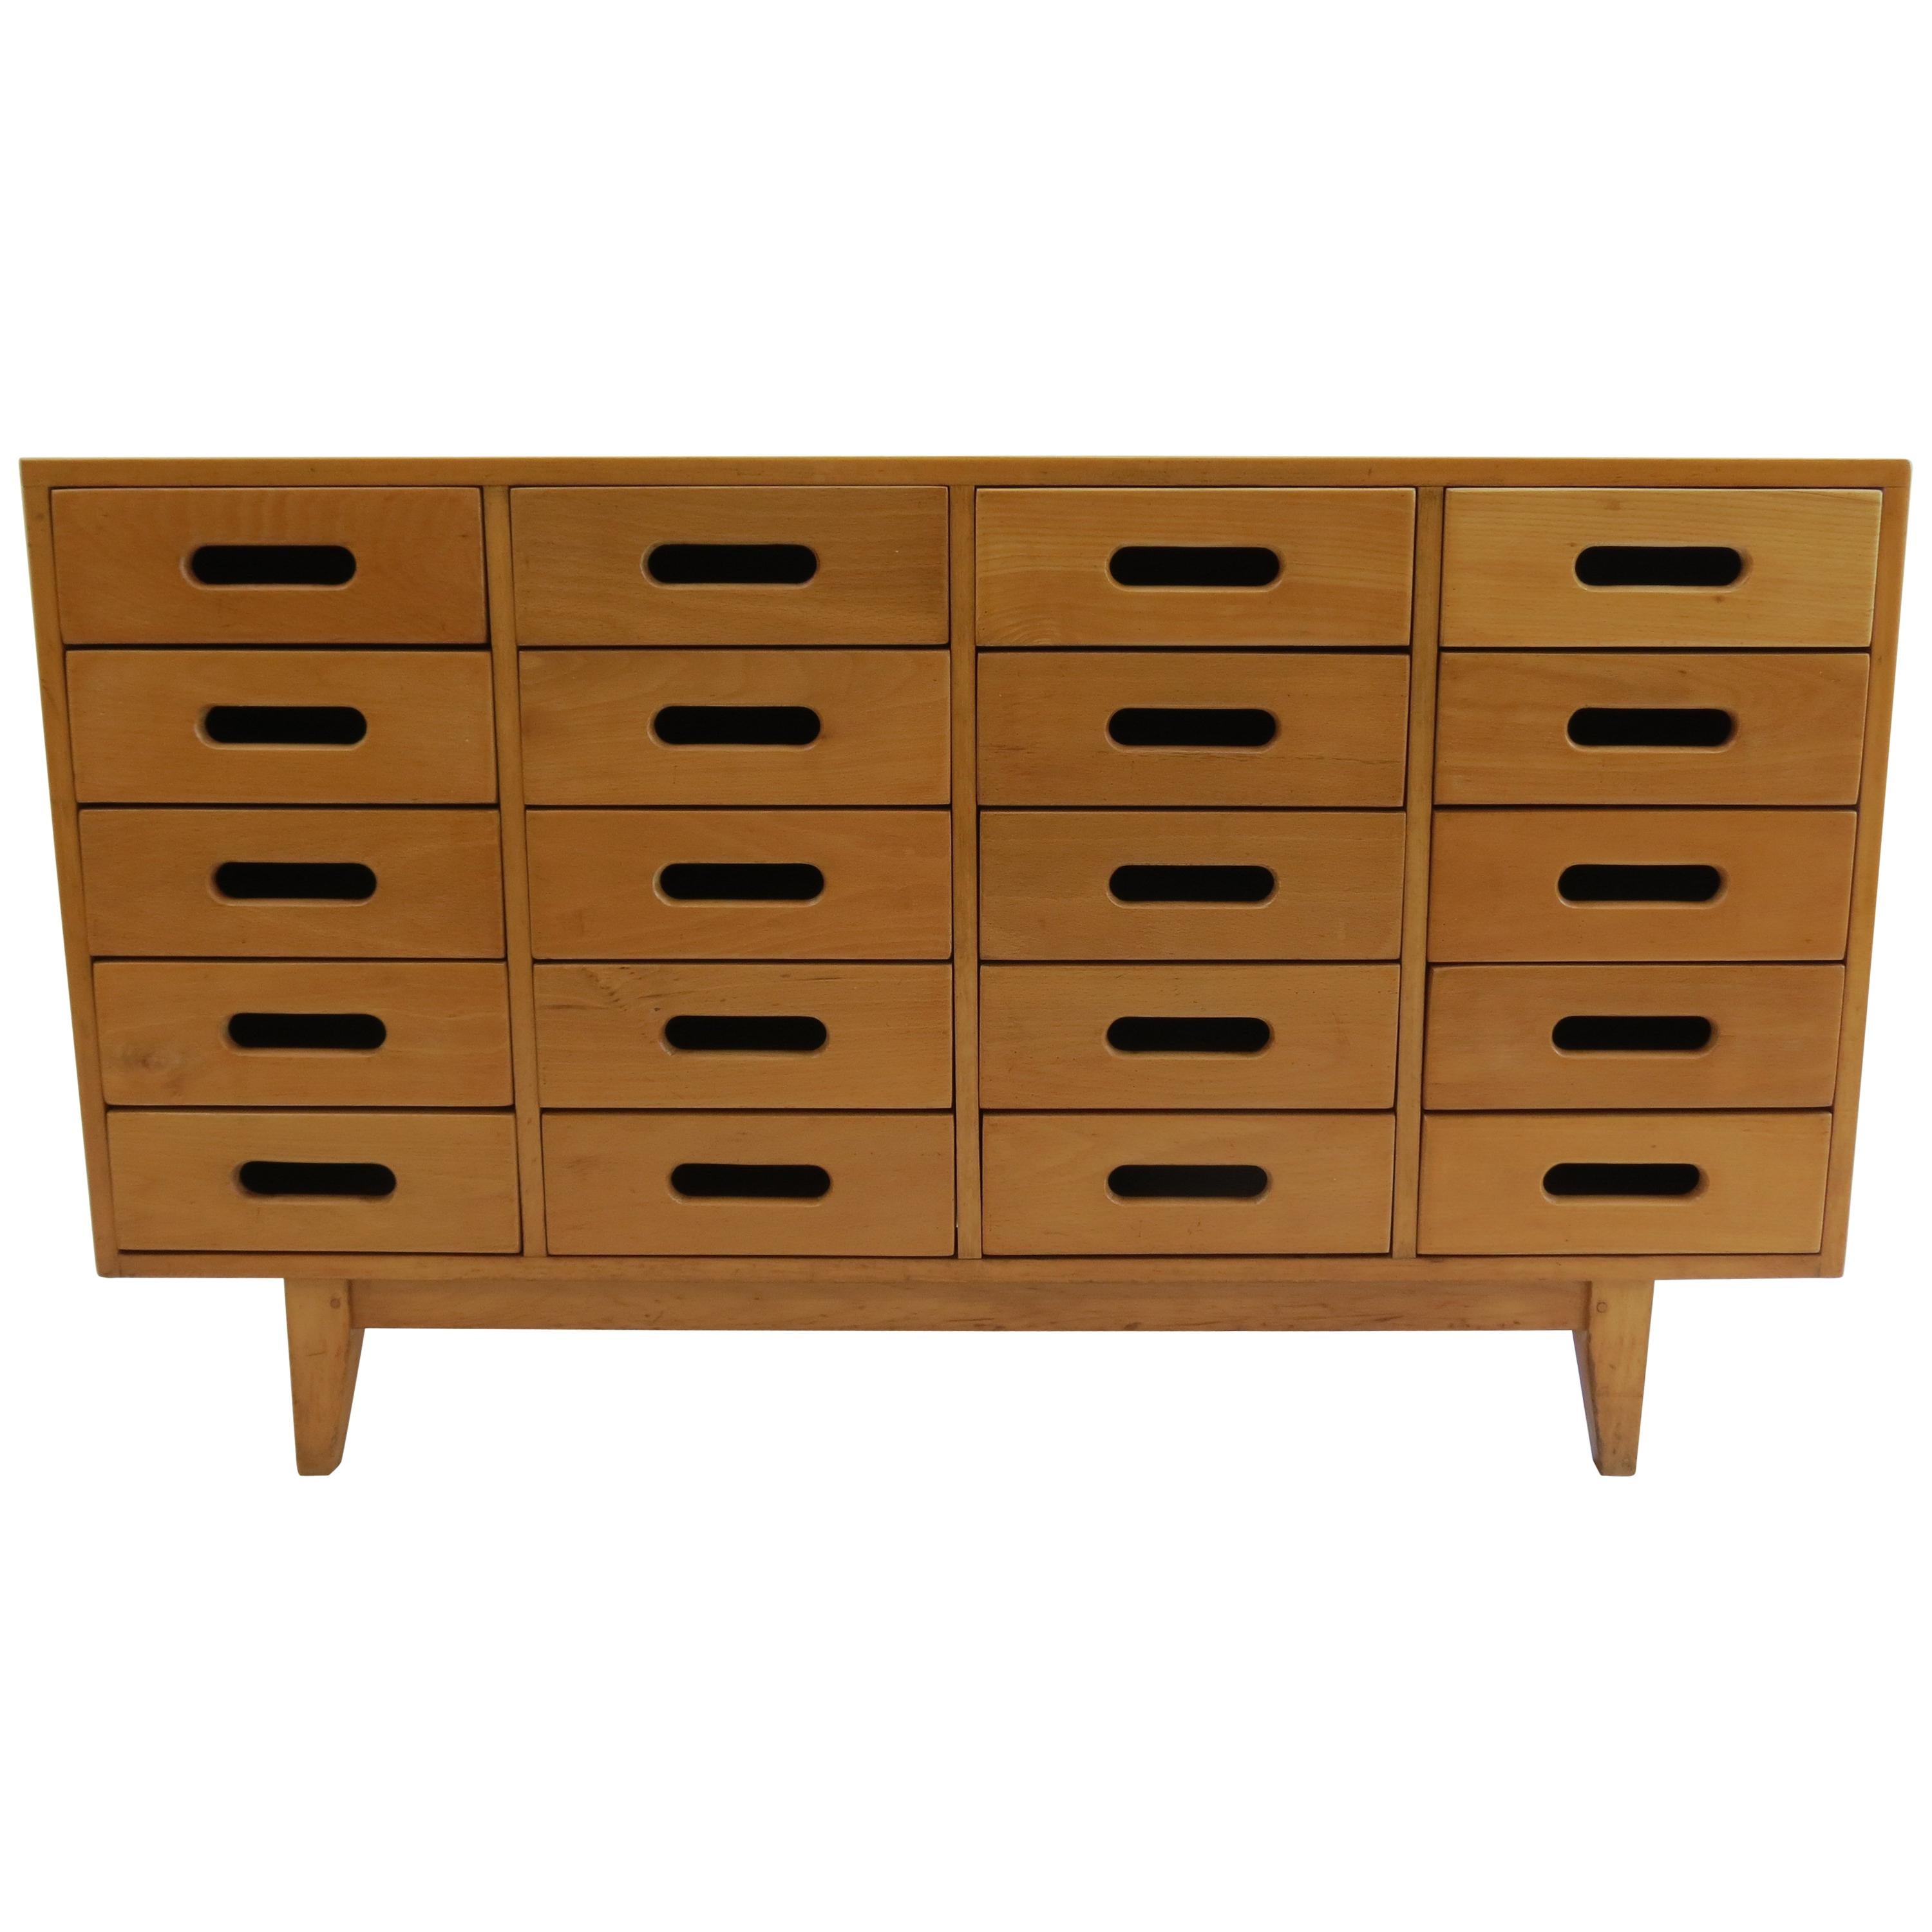 1950s School Chest of Drawers by James Leonard for Esavian Beech